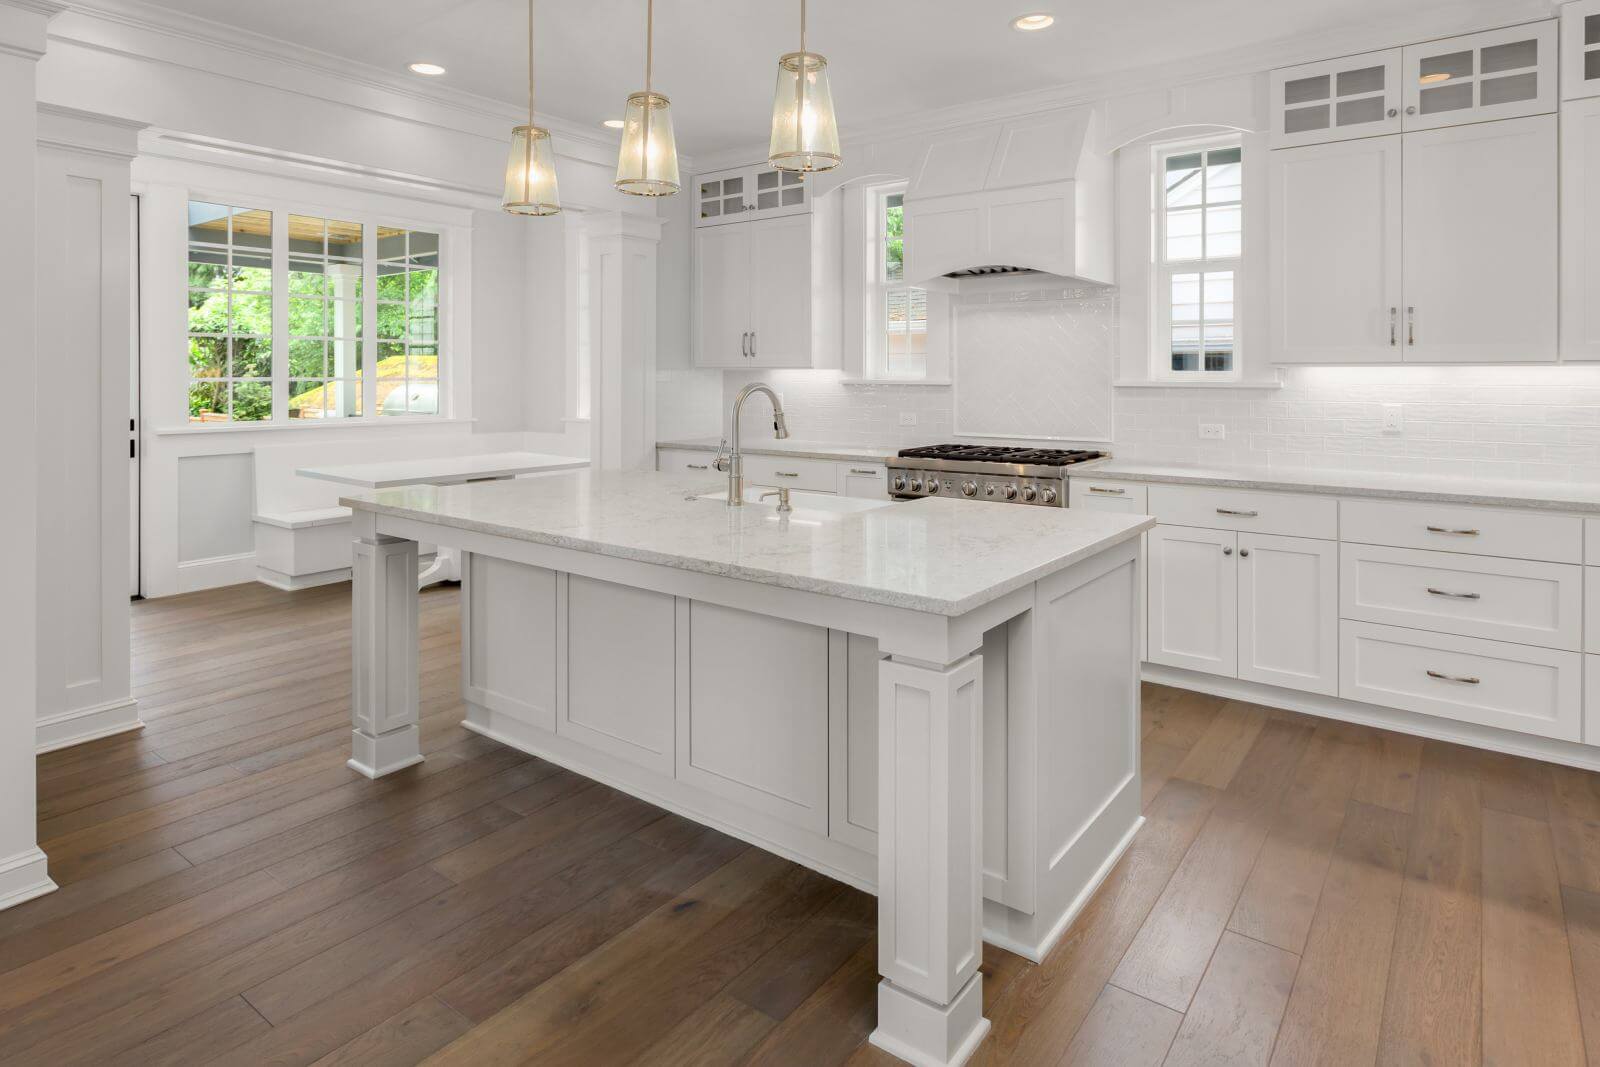 Beautiful White Kitchen in New Luxury Home with Hardwood Floors, Island, and Eating Nook